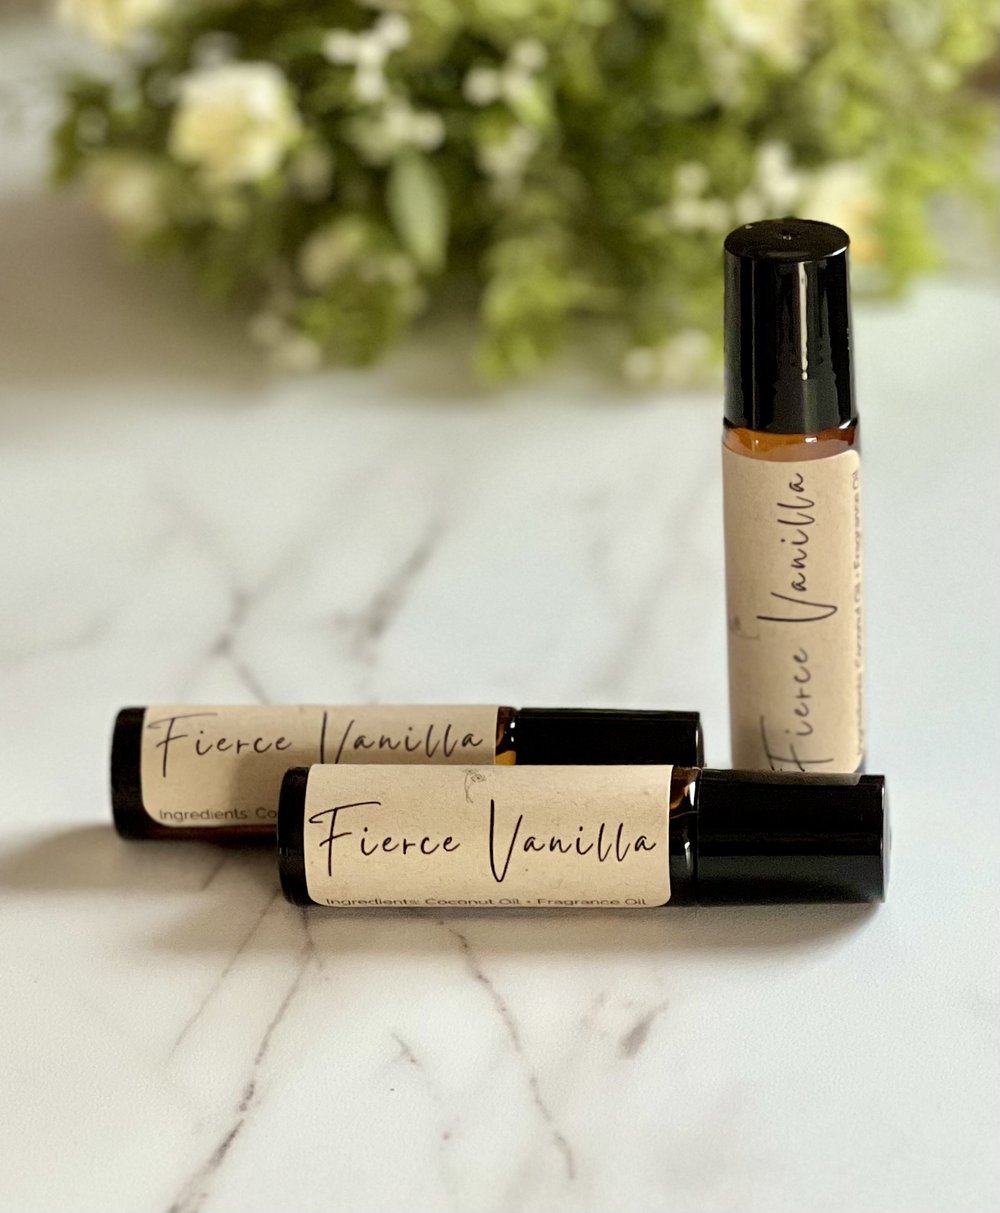 Amber Perfume Oil Roll On 5ml – A Shop of Things